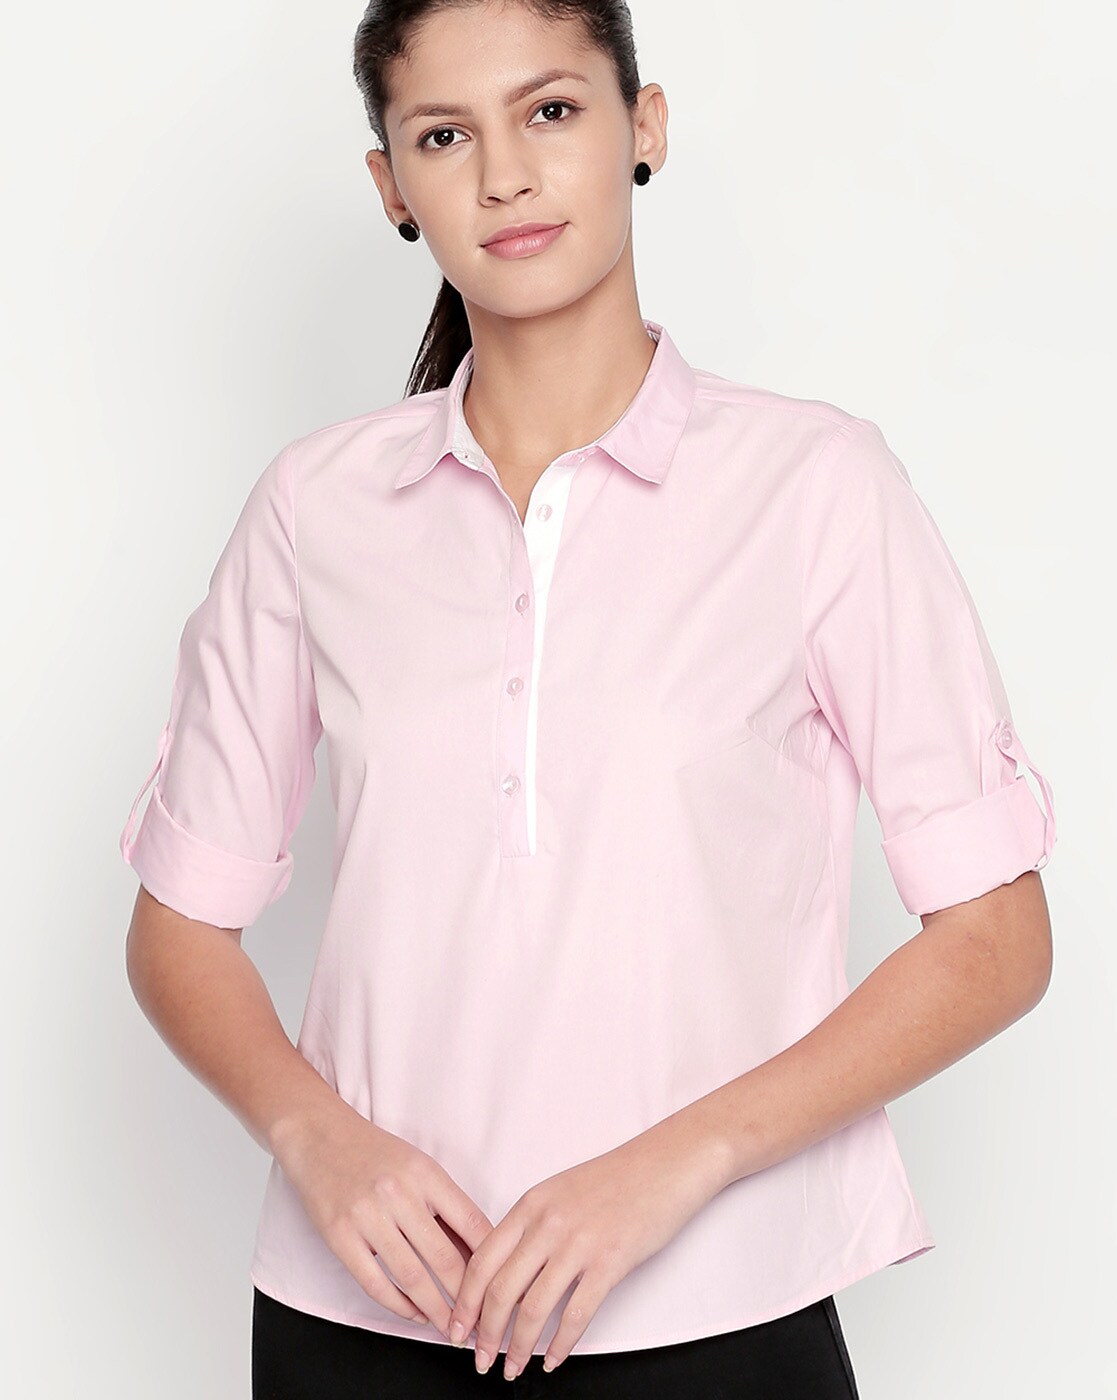 Annabelle by Pantaloons Pink Slim Fit Top